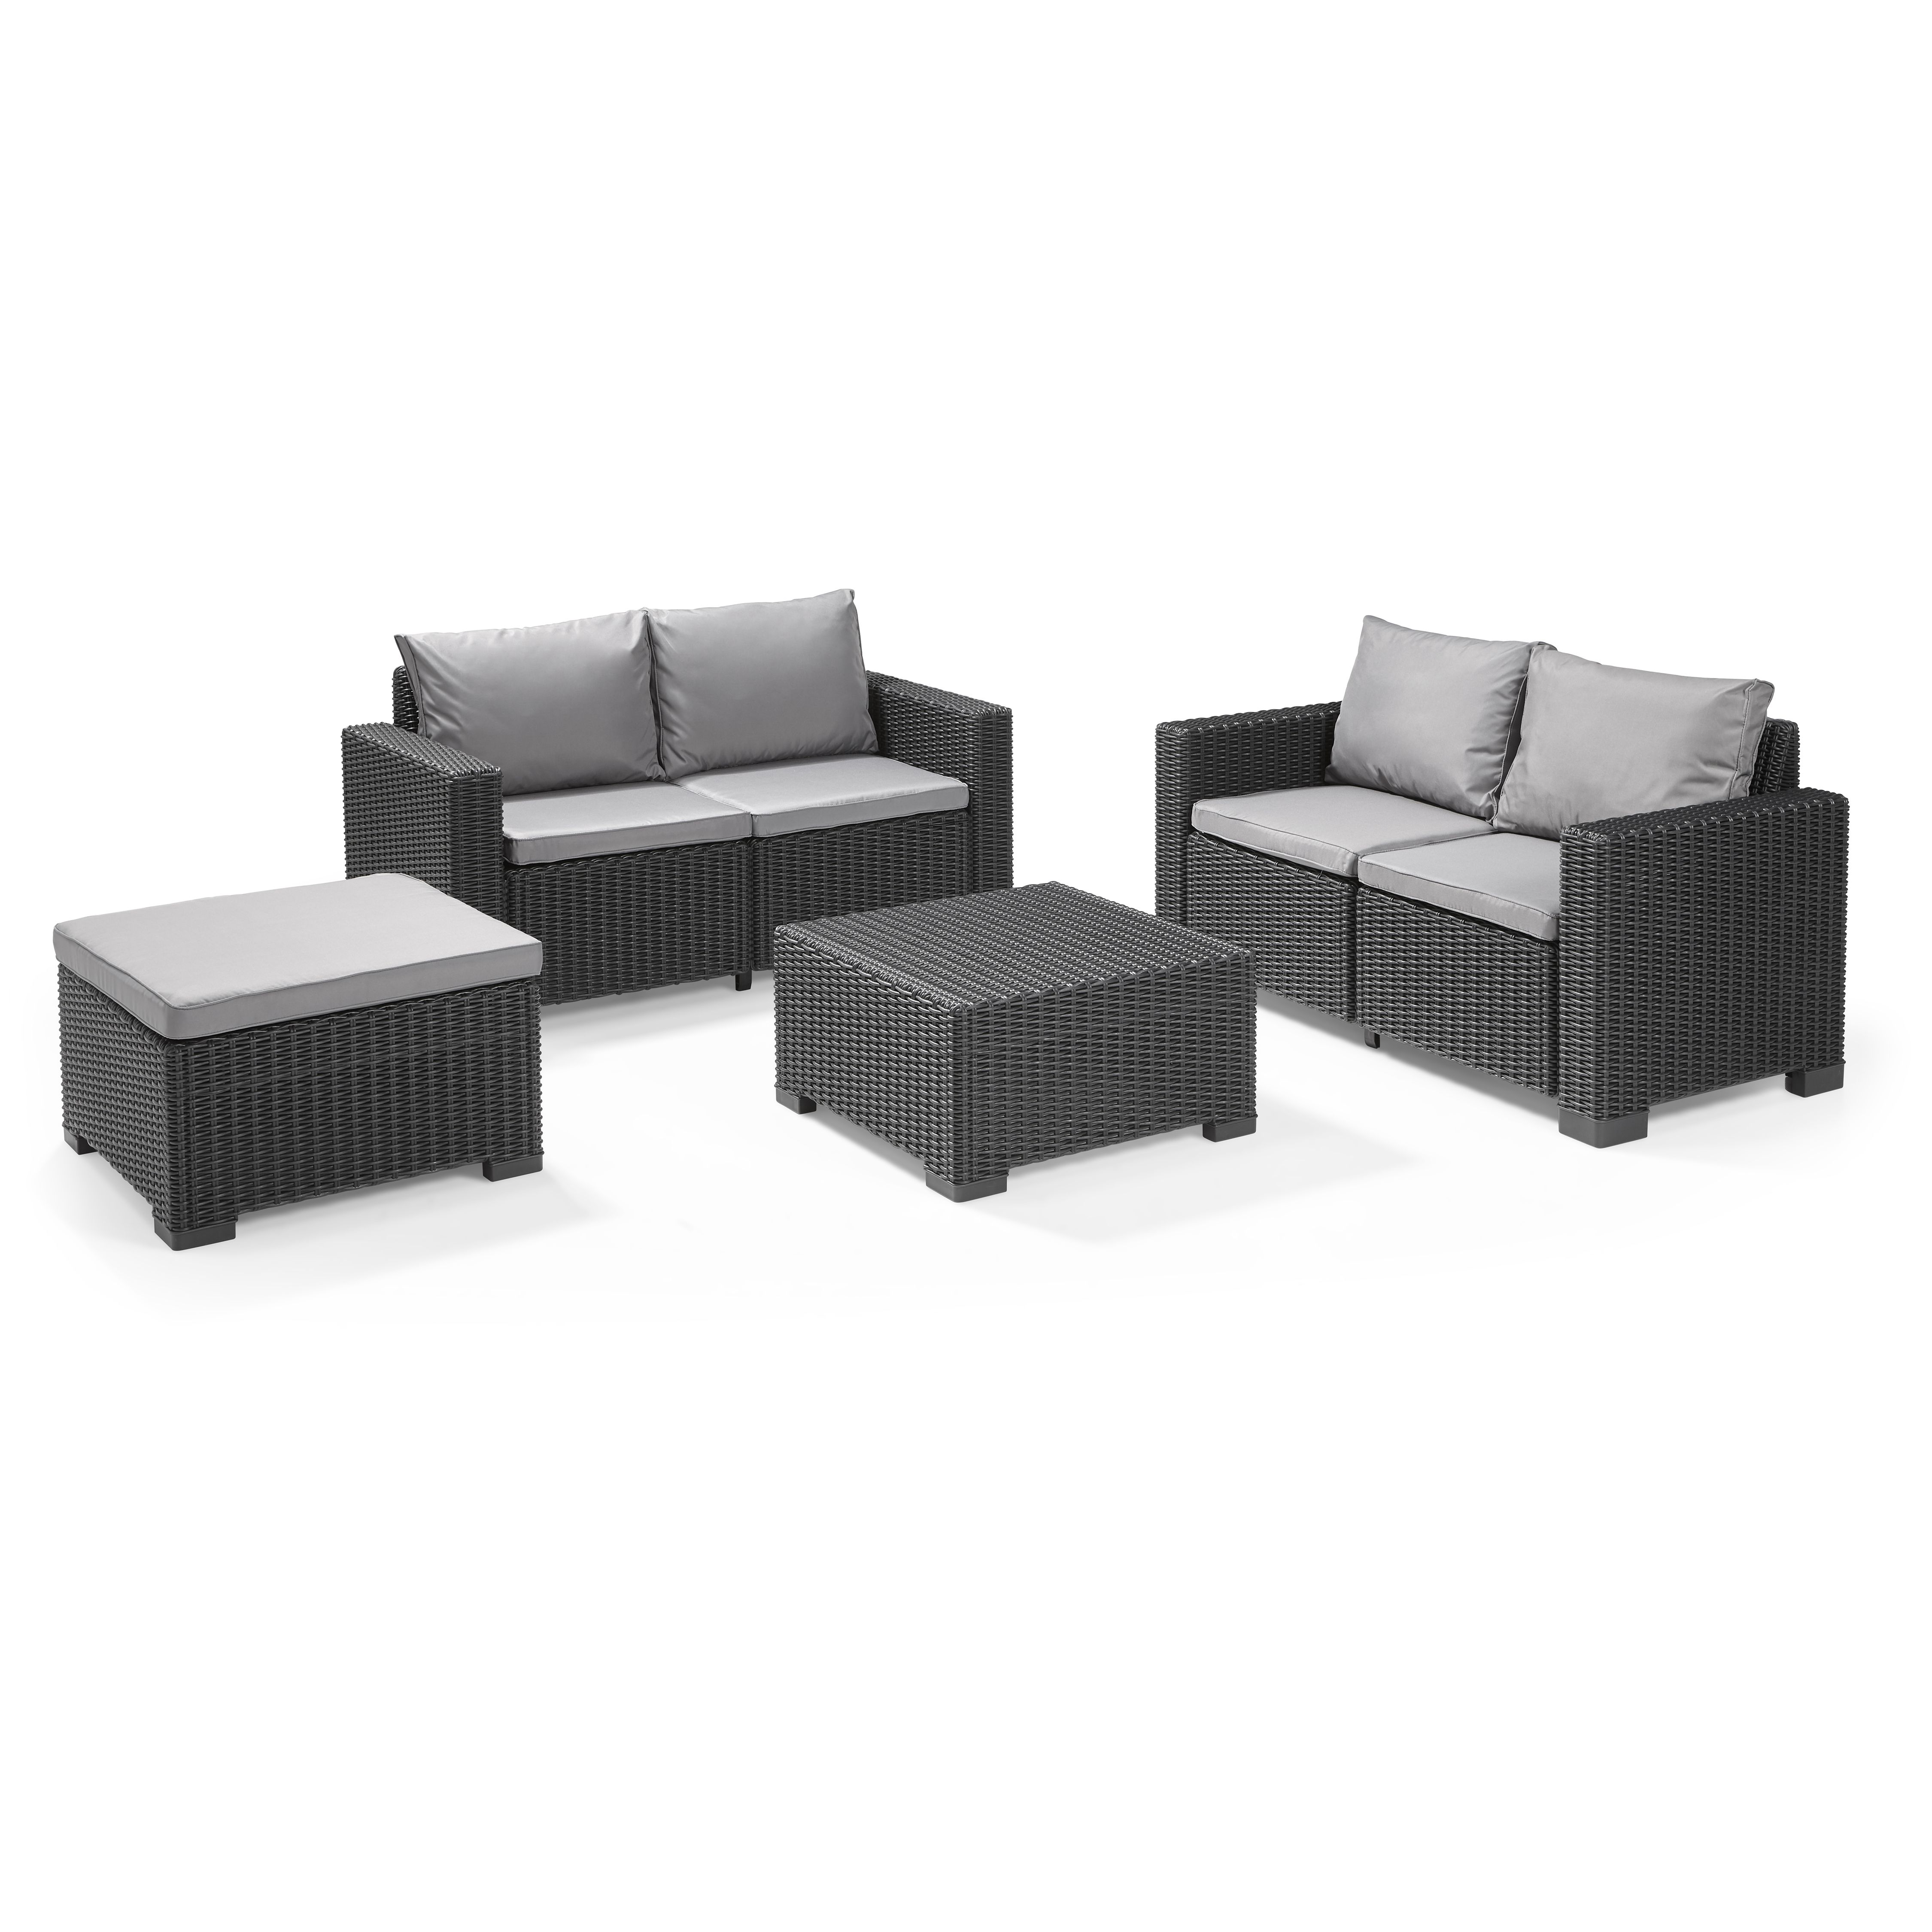 Keter California Graphite 4 Seater Garden furniture set with Double sofa & Footstool